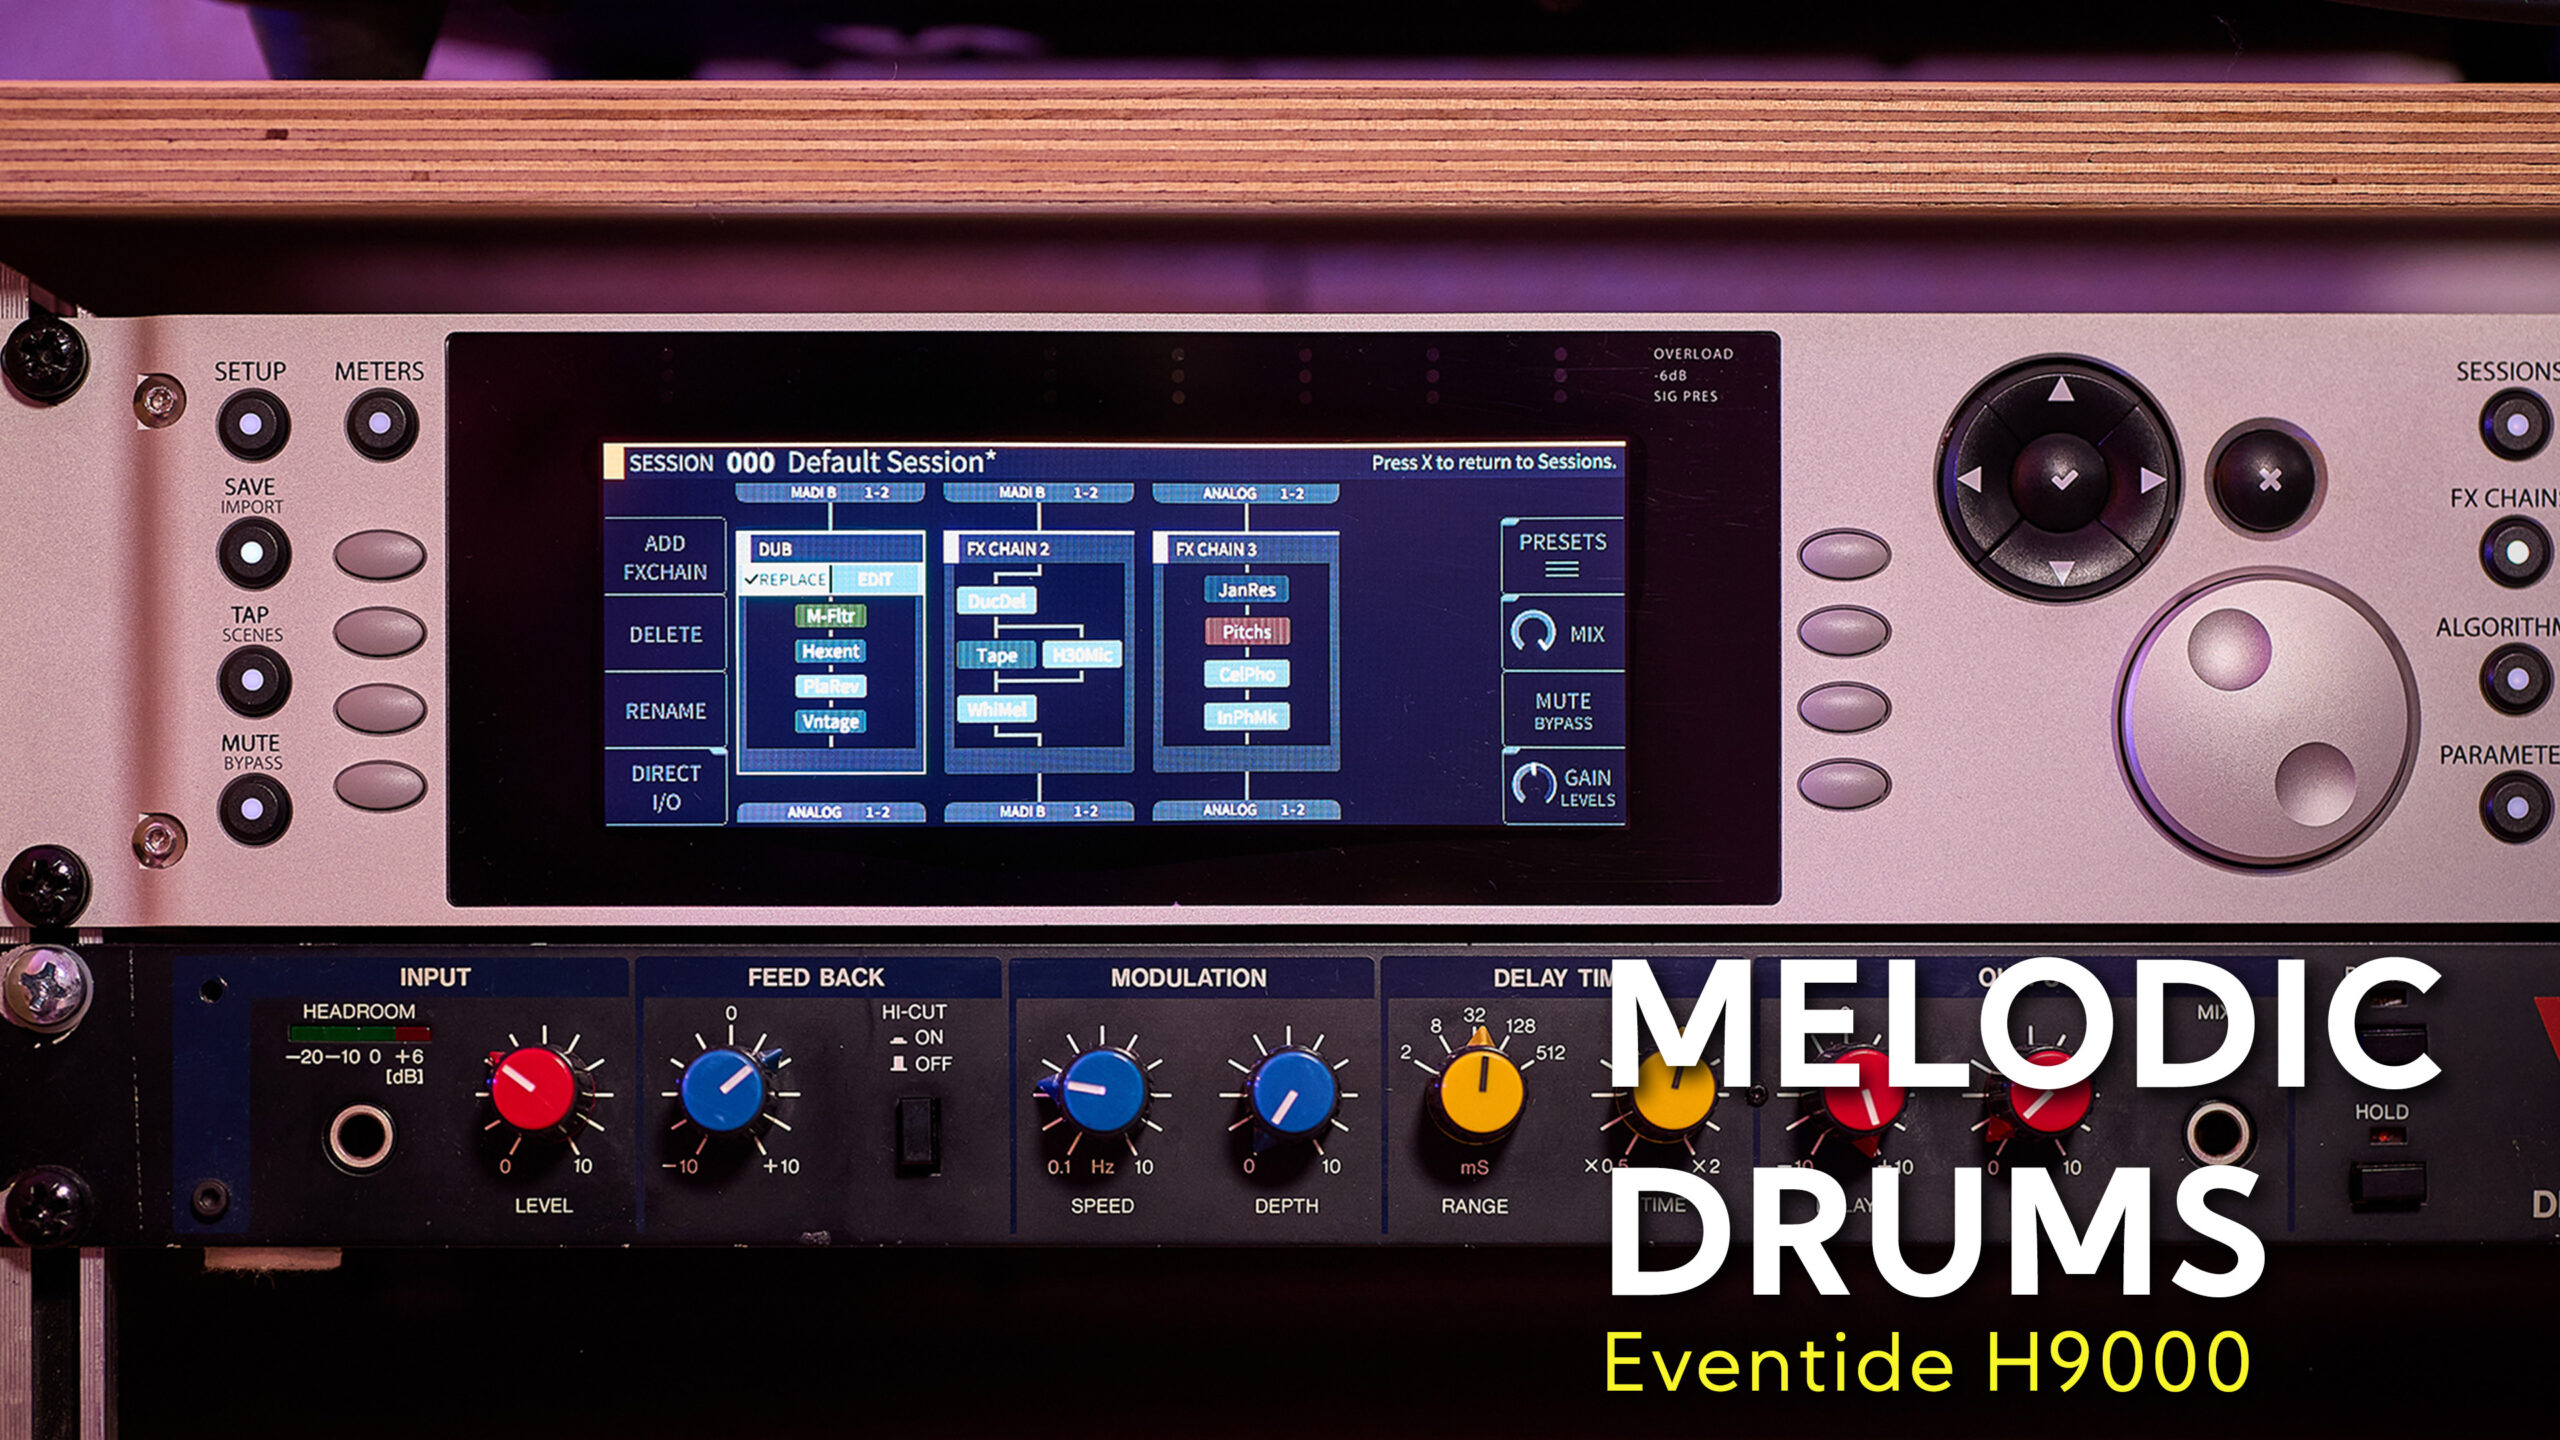 Melodic Lo-Fi Drums | Eventide H9000